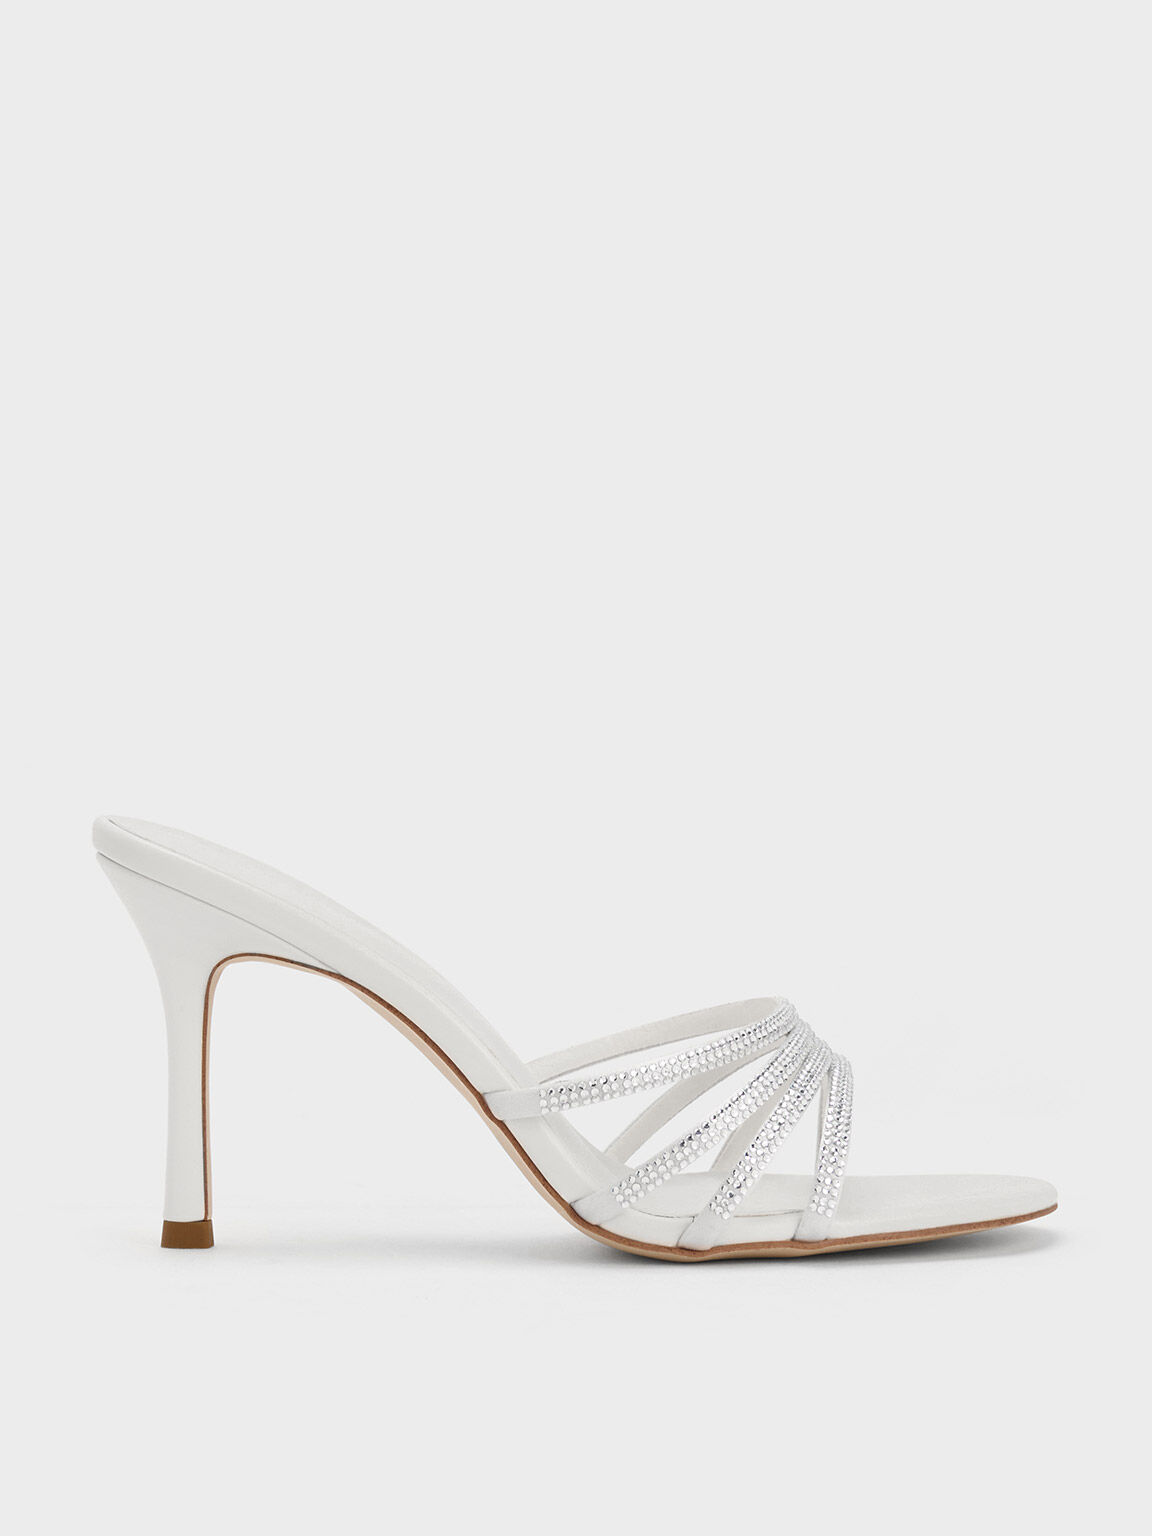 White Satin Crystal-Embellished Heeled Mules - CHARLES & KEITH VN